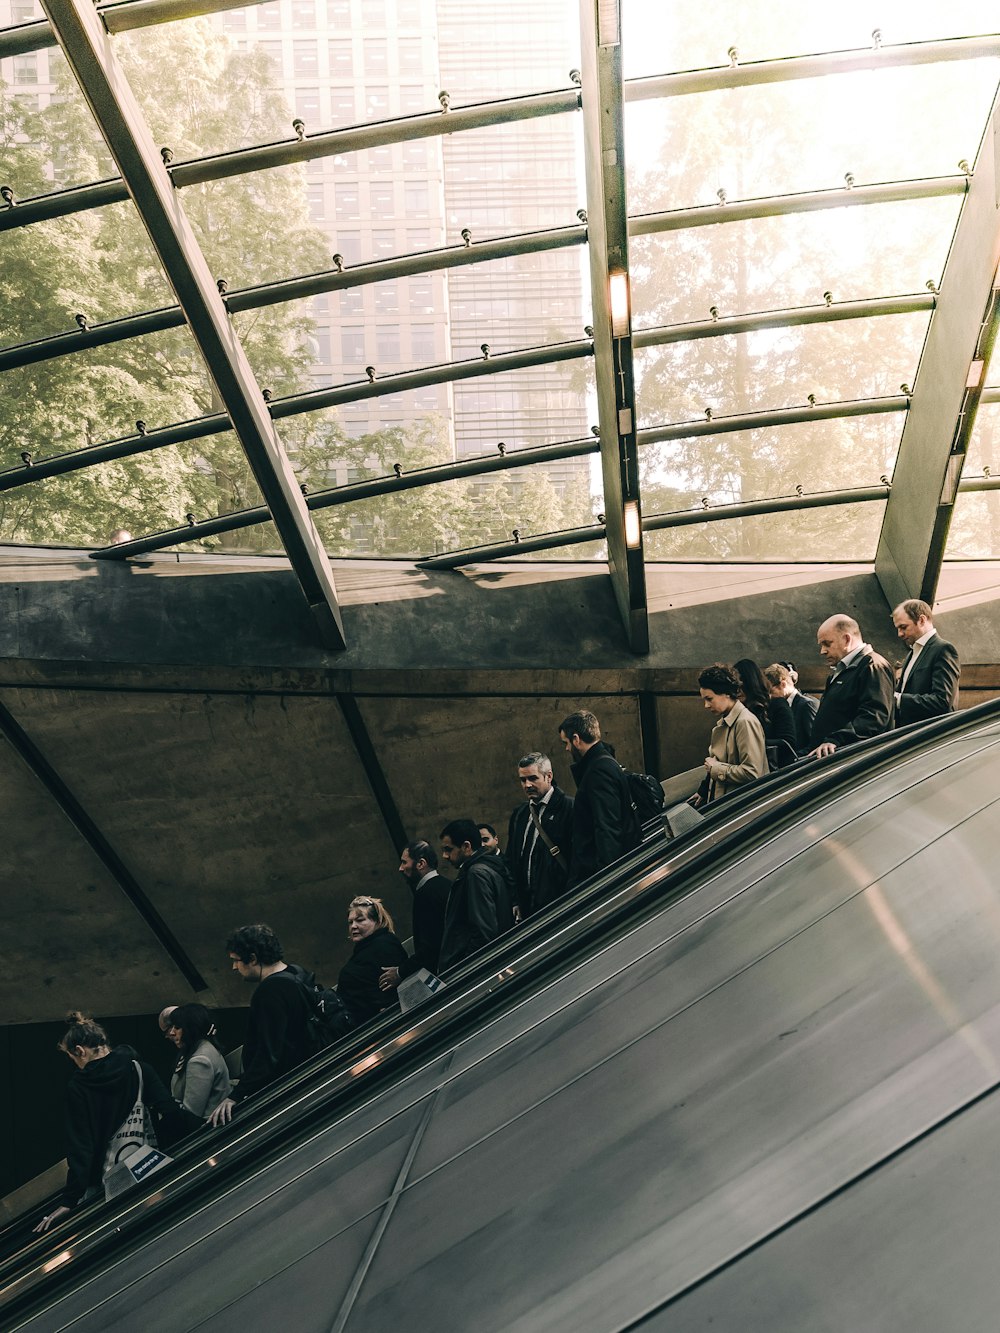 A line of people in business attire on an escalator in Canary Wharf